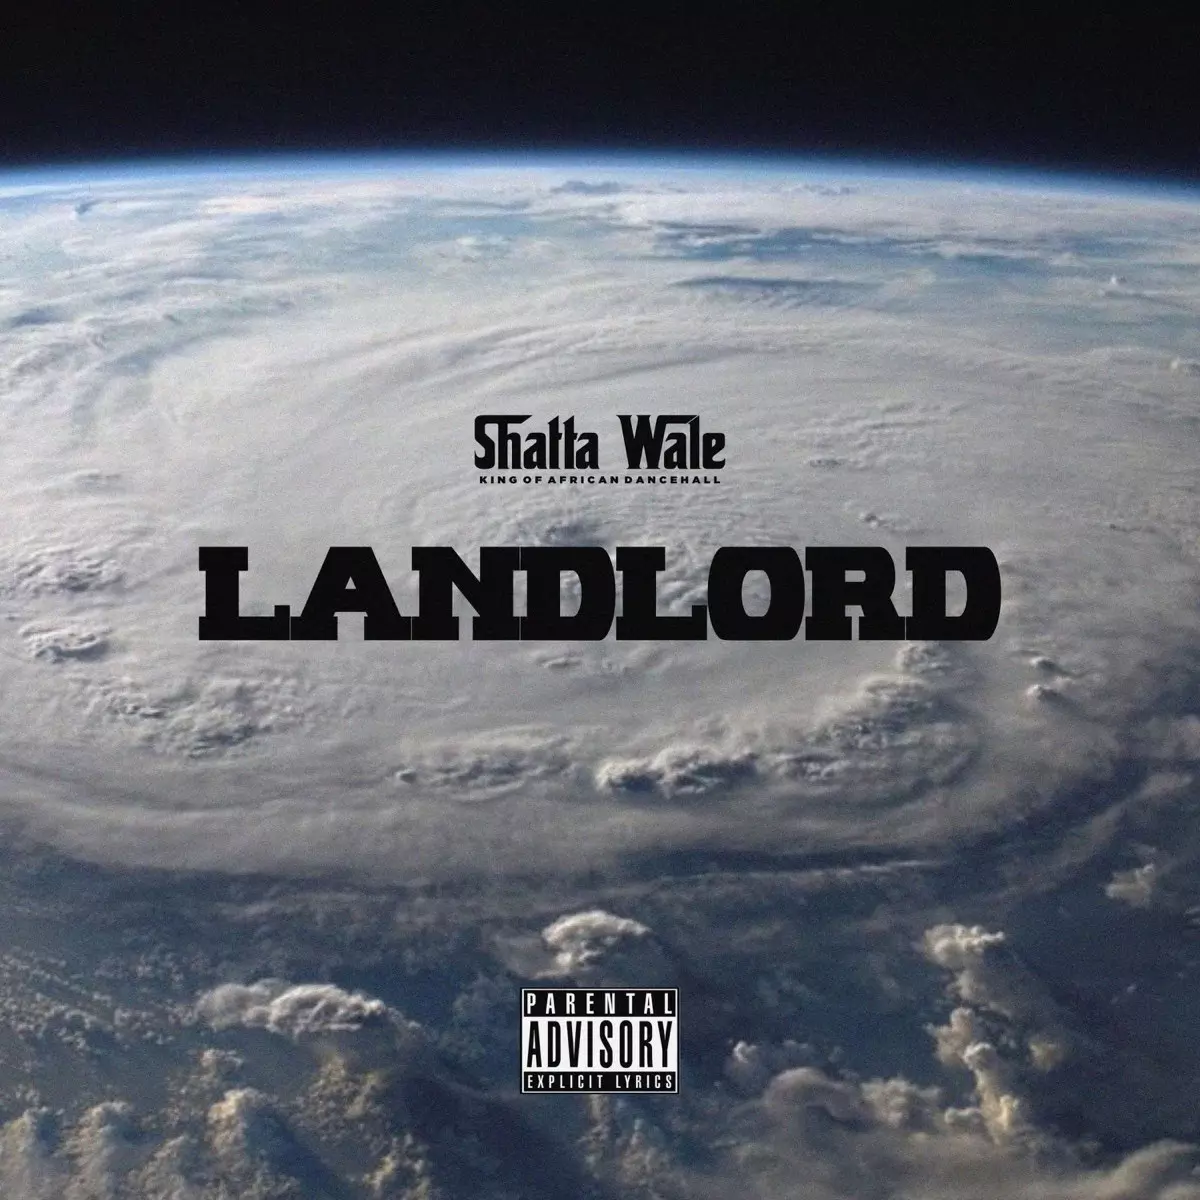 Land Lord - Single by Shatta Wale on Apple Music